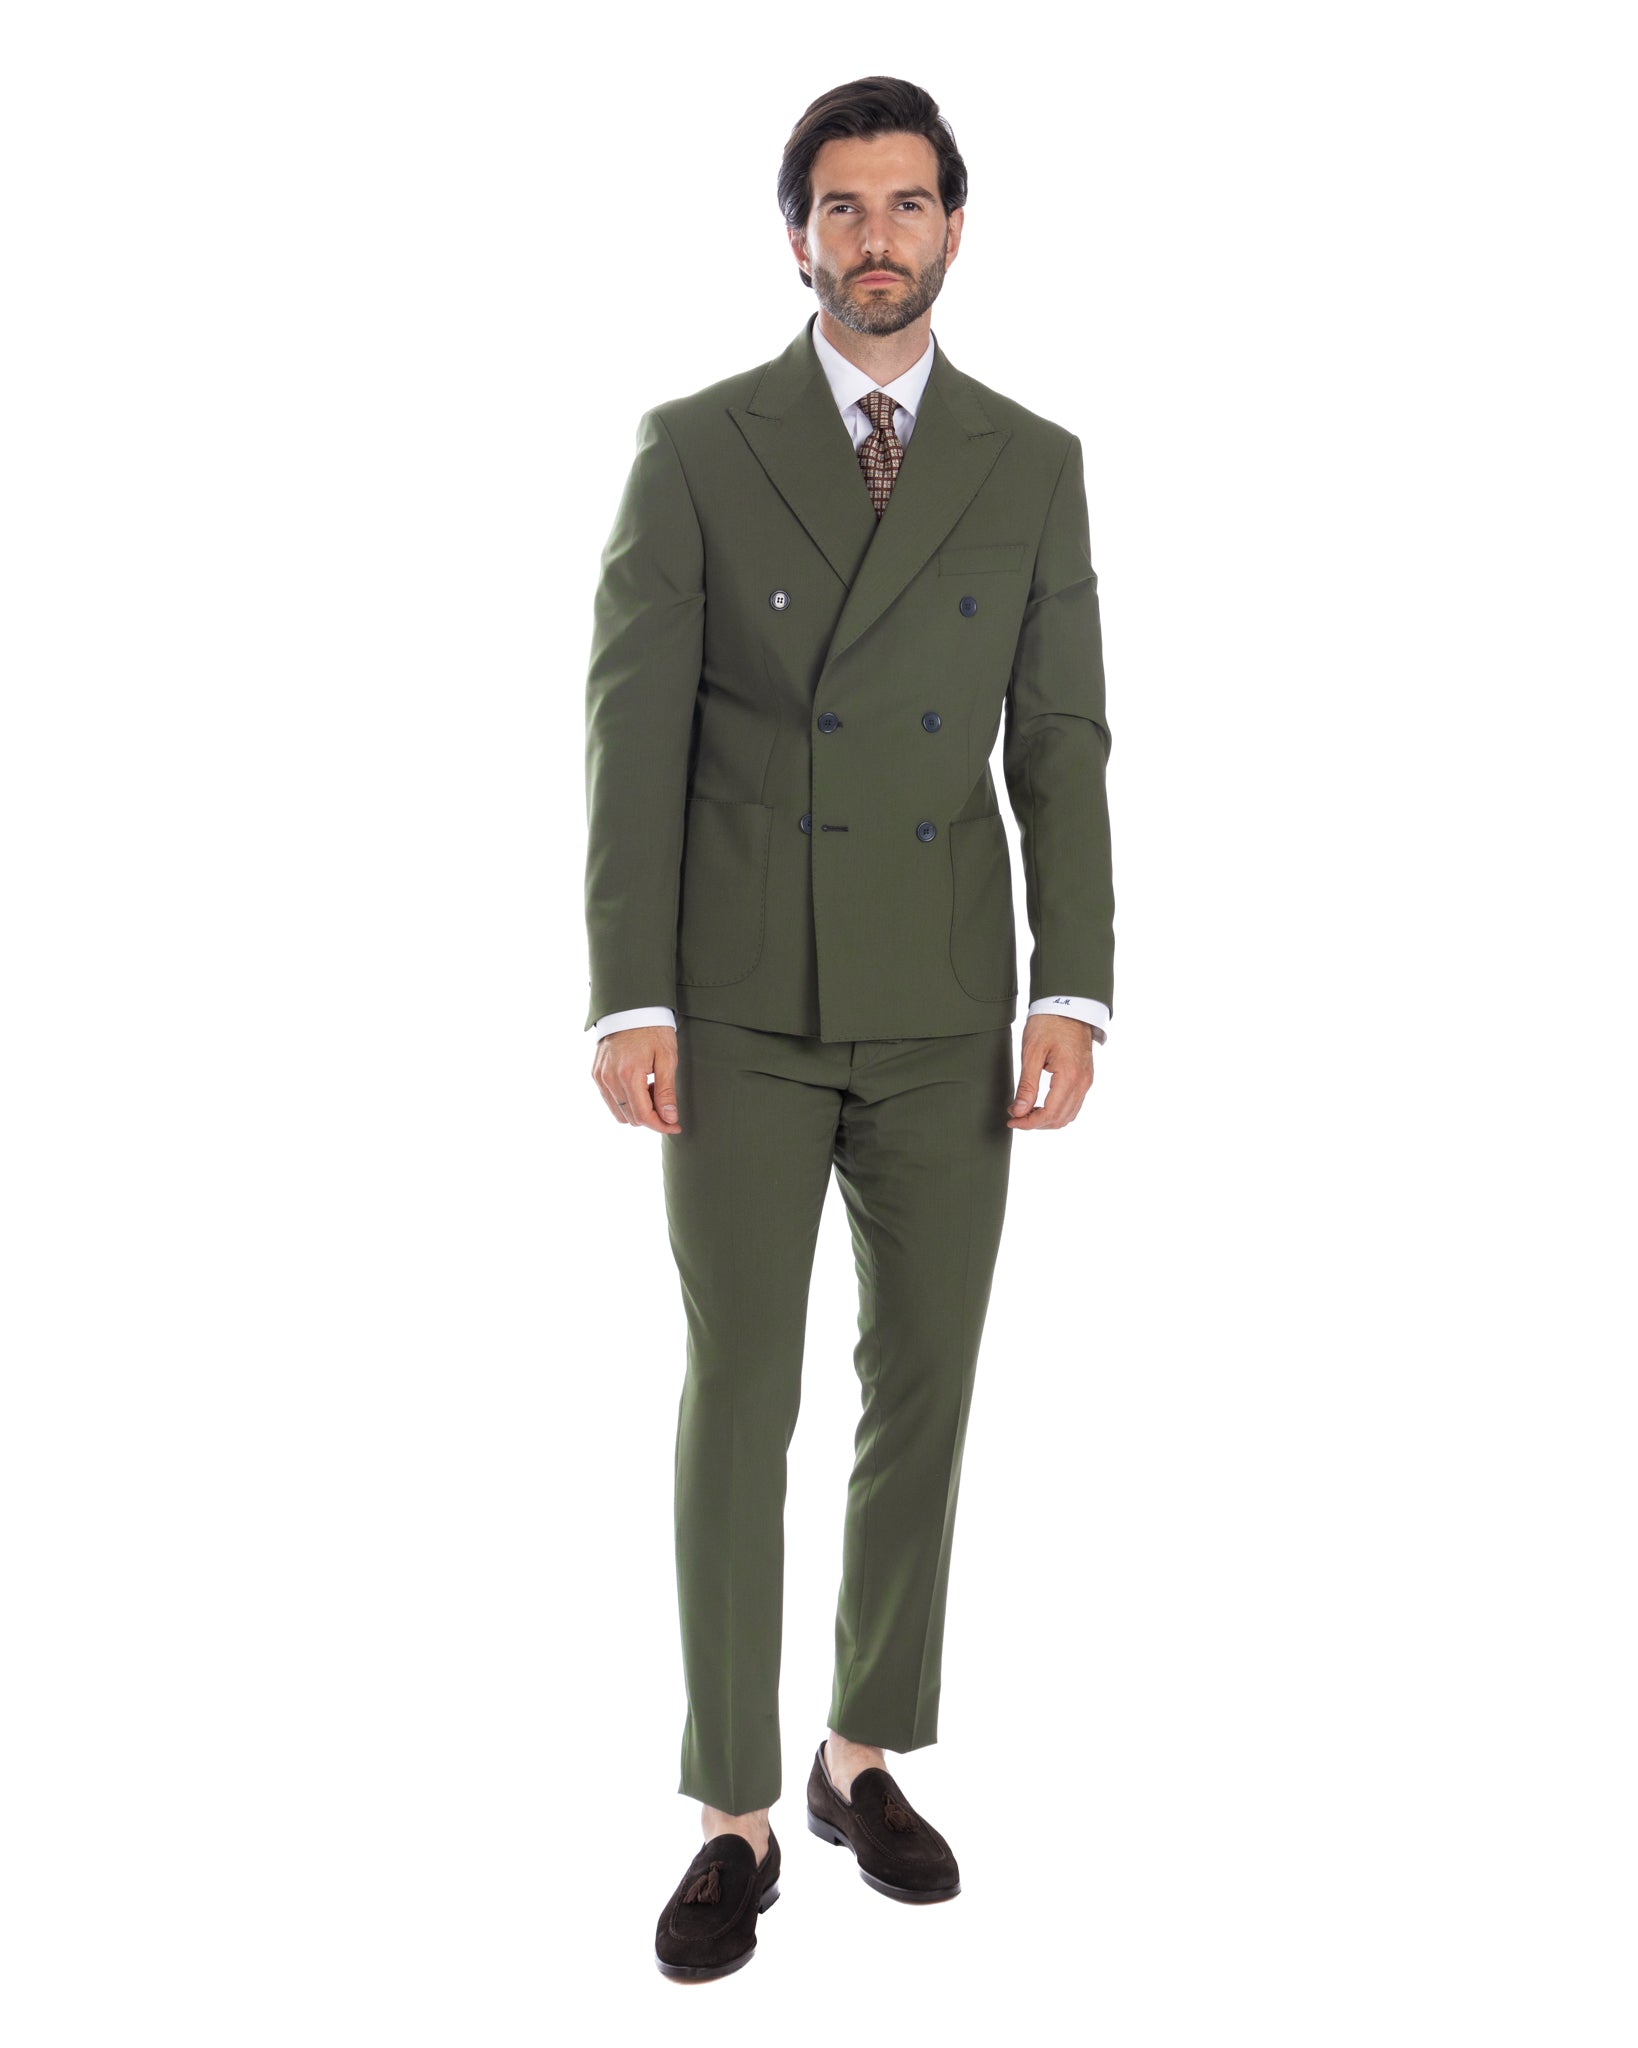 Monaco - military double-breasted suit